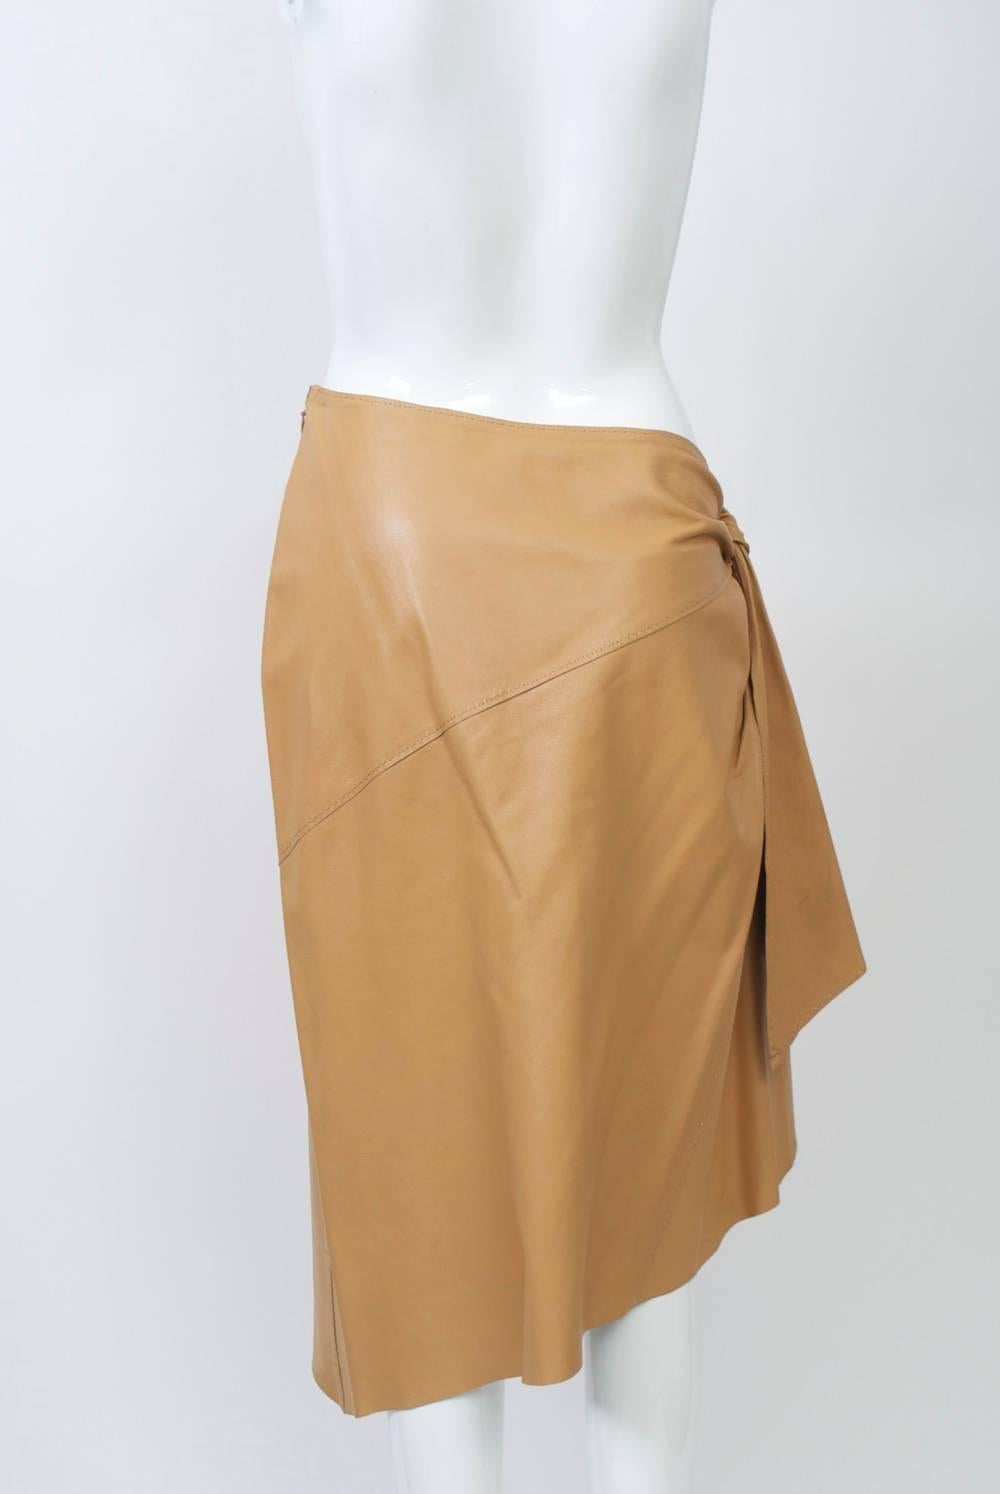 Sarong-style skirt by Hermes in softest camel lambskin with asymmetrical waist and hem. Zipper on the high, left side slants to tiered tie motif on the right hip with opposed diagonal seaming front and back.